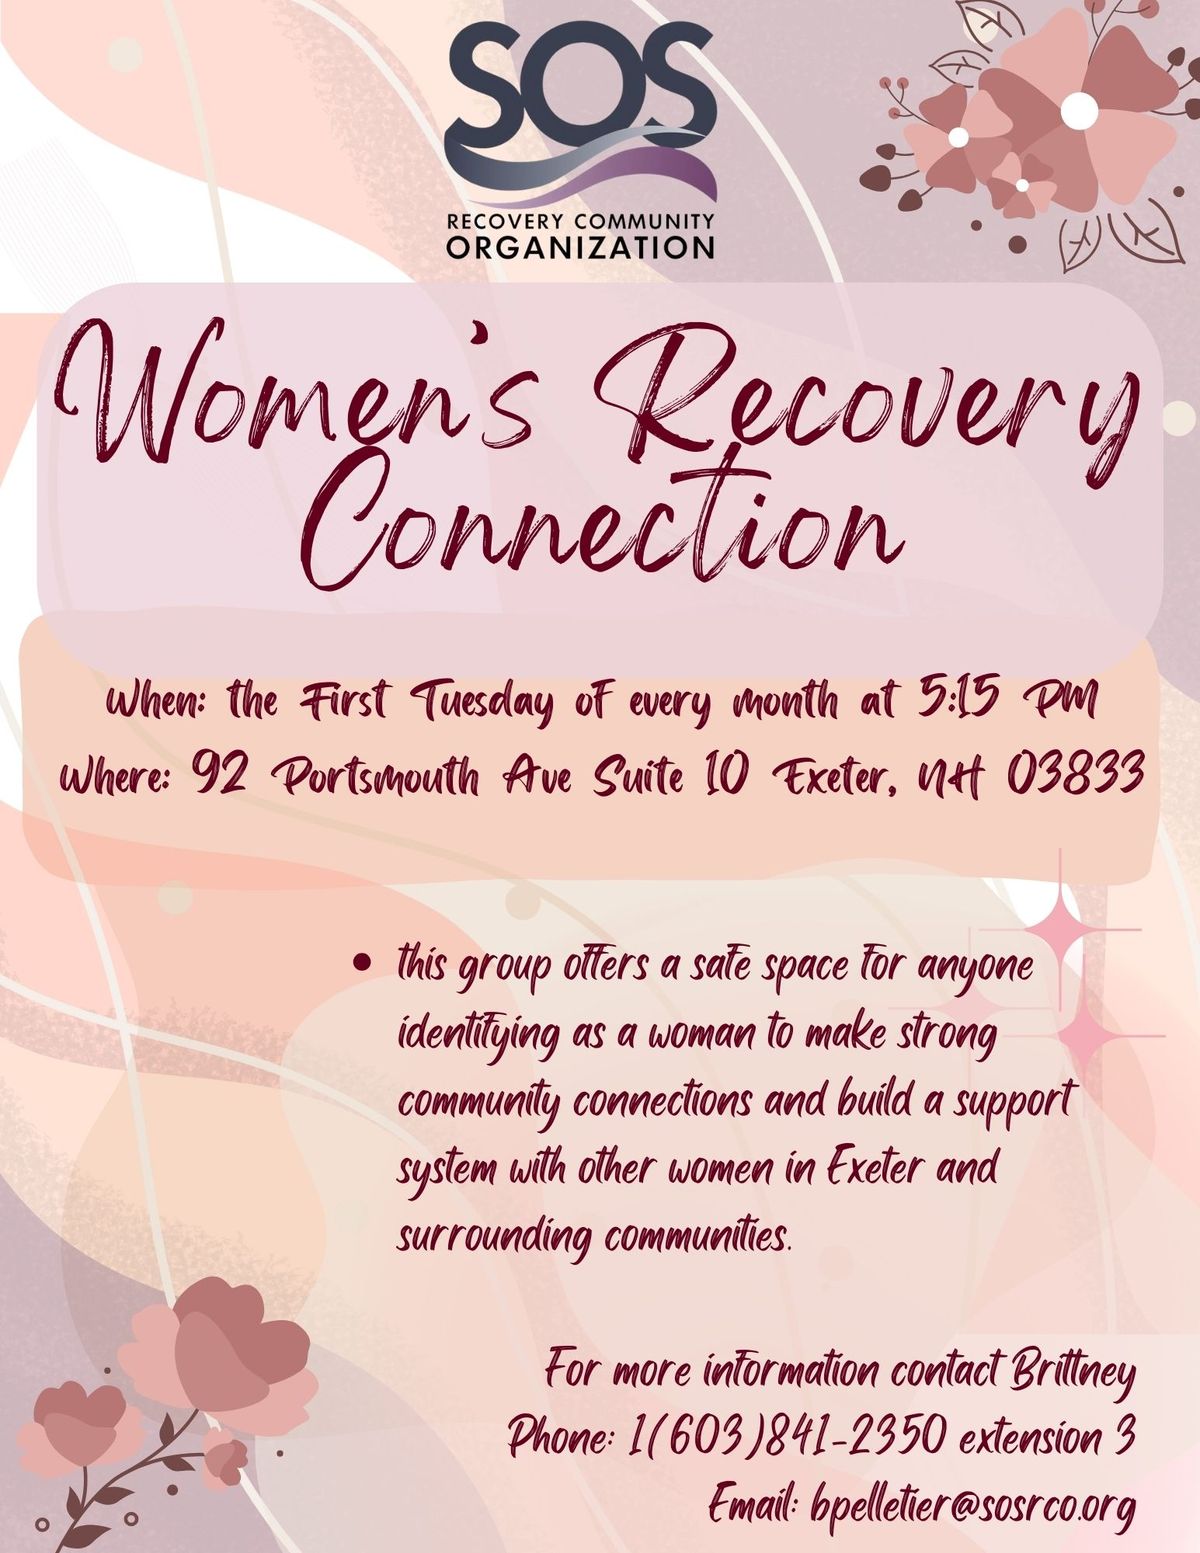 Women's Recovery Connection